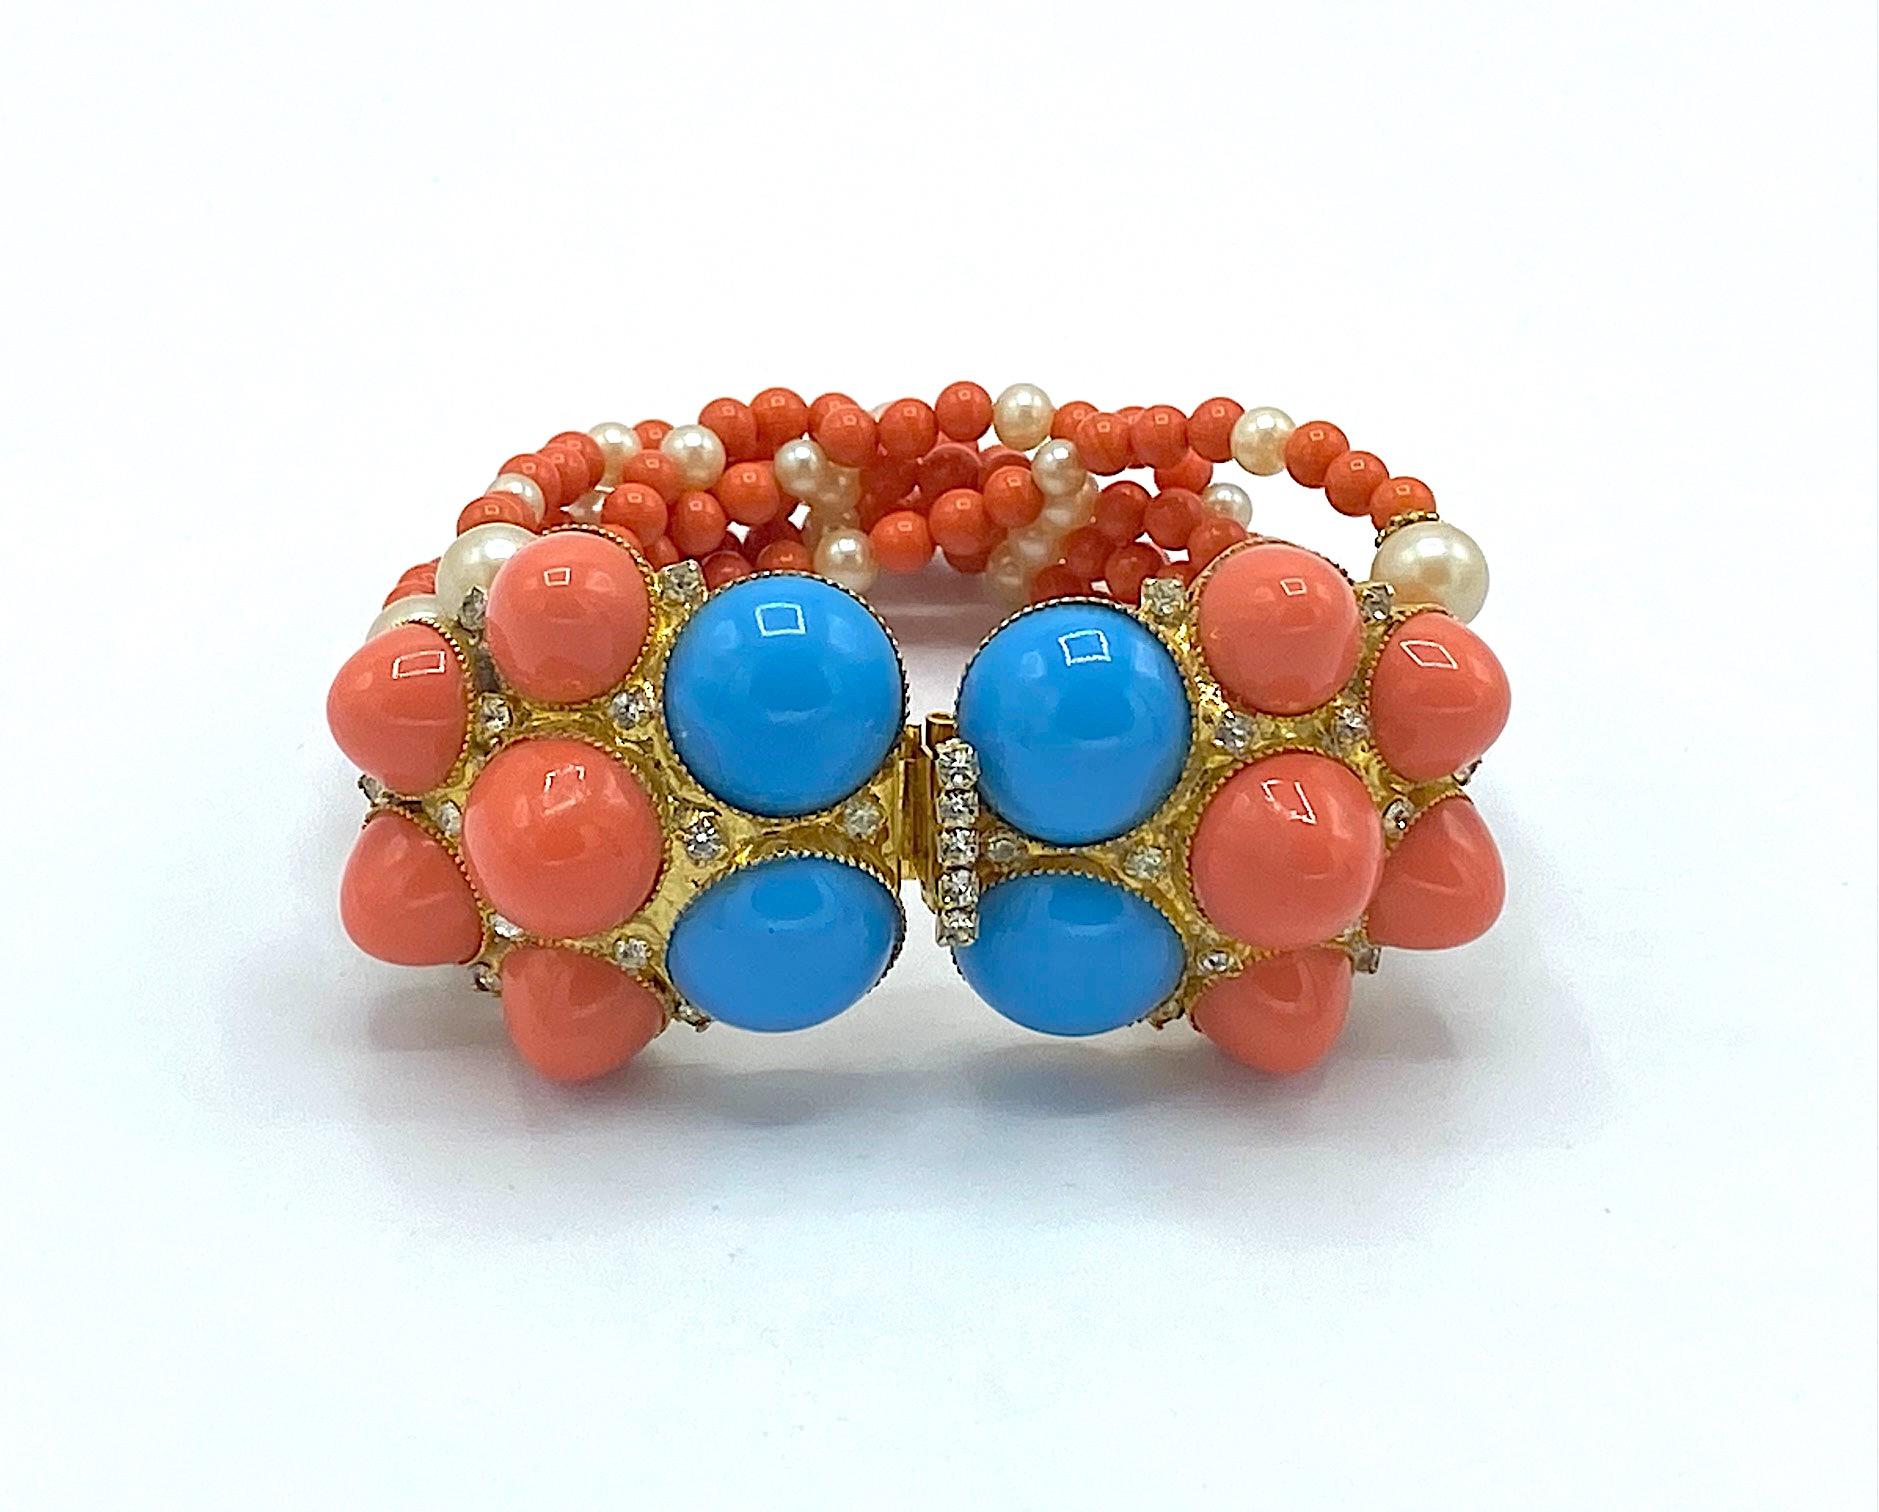 De Lillo 1970s Faux Coral & Turquoise Bracelet and Earrings 4